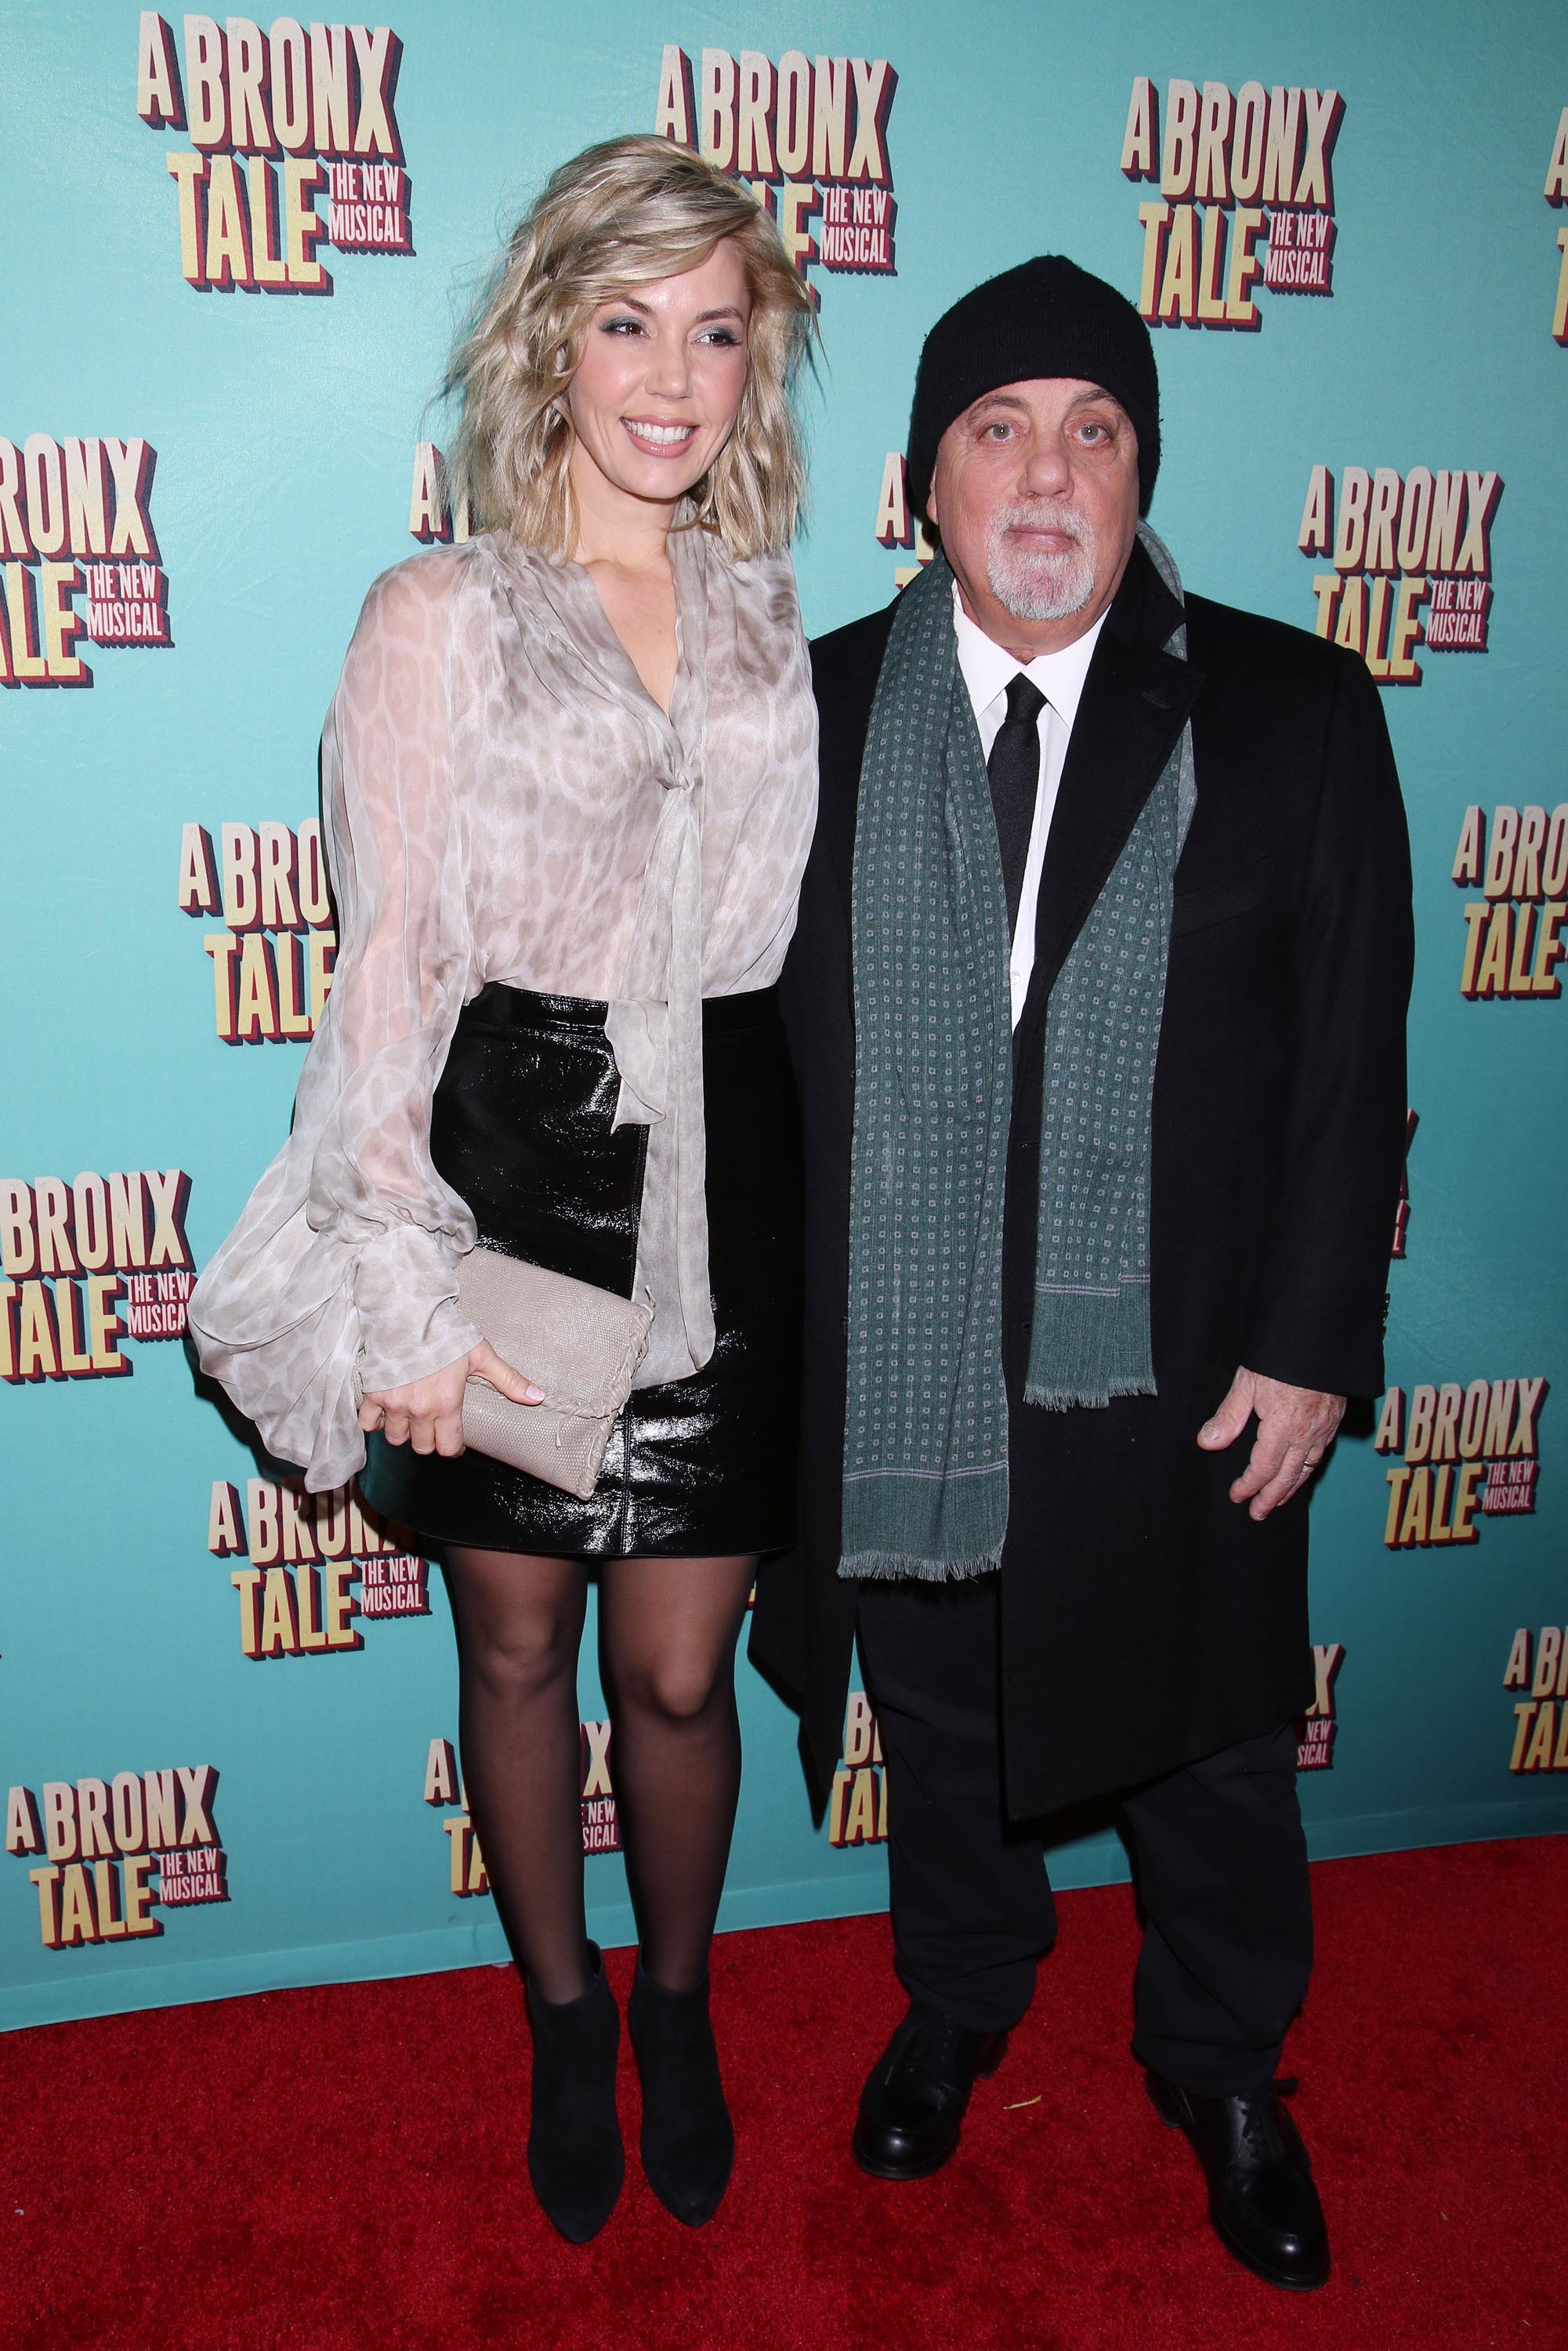 Alexis Roderick opening night of A Bronx Tale